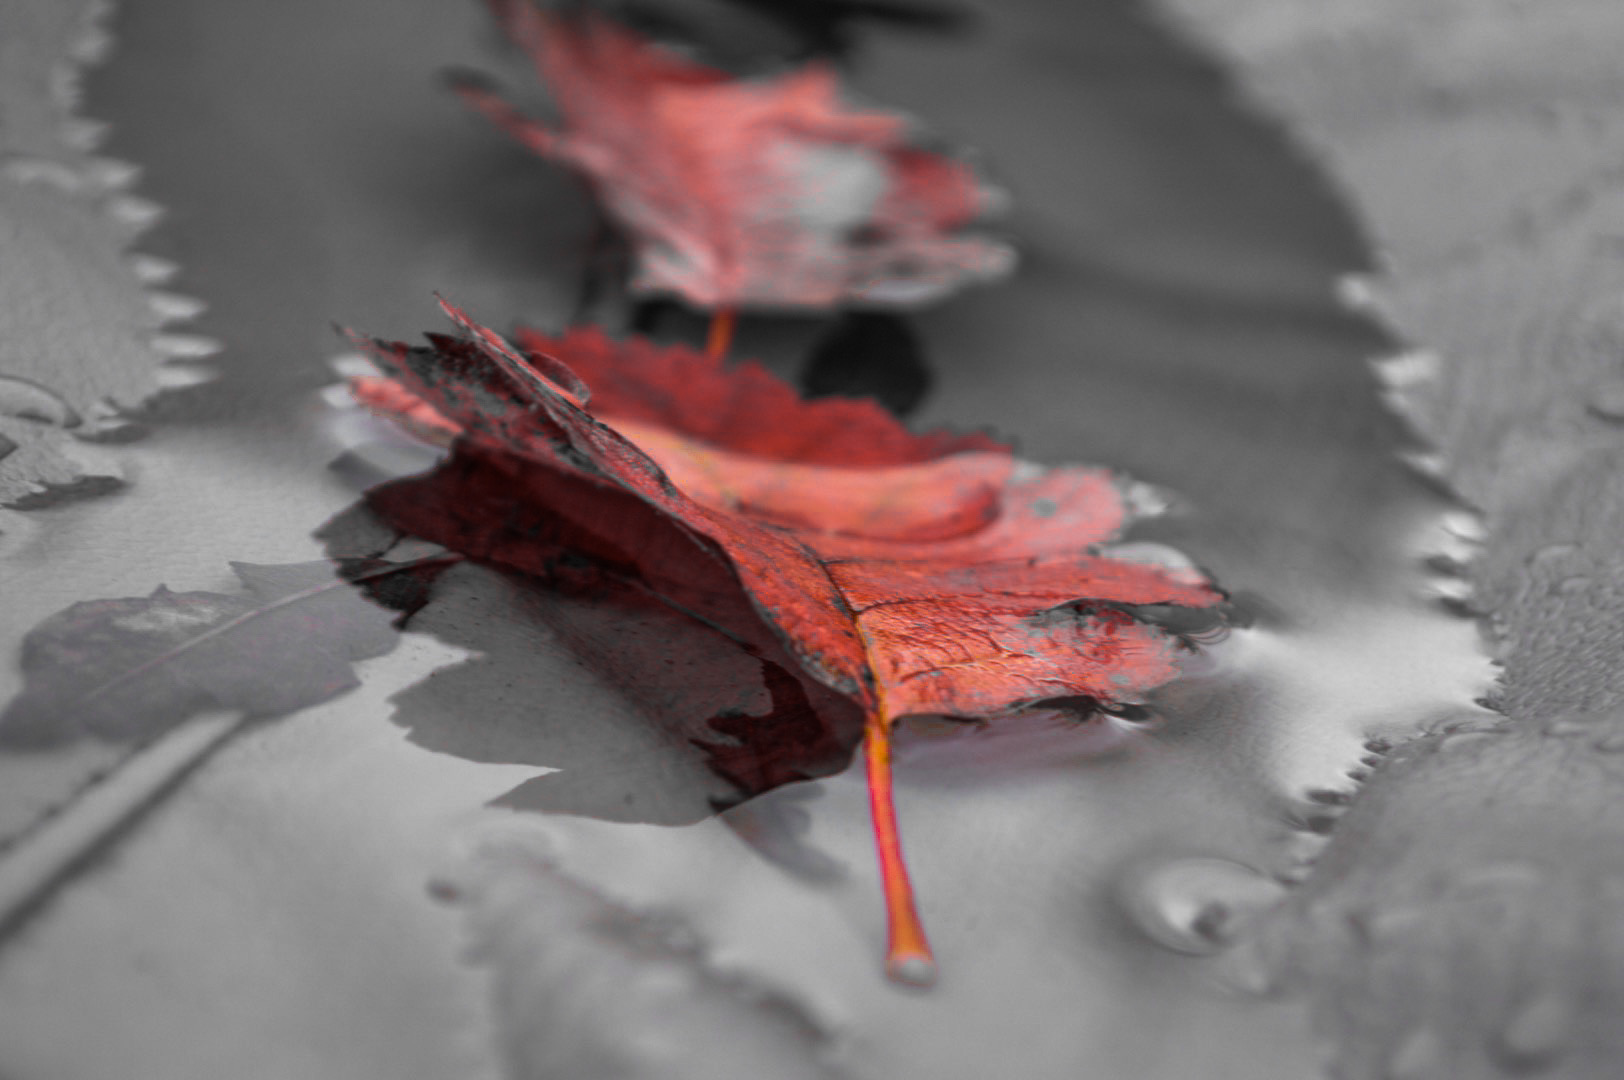 A pink leaf balanced in a puddle of water taken from a close up angle. The image is edited so that the background is black and white and the leaf is pink.